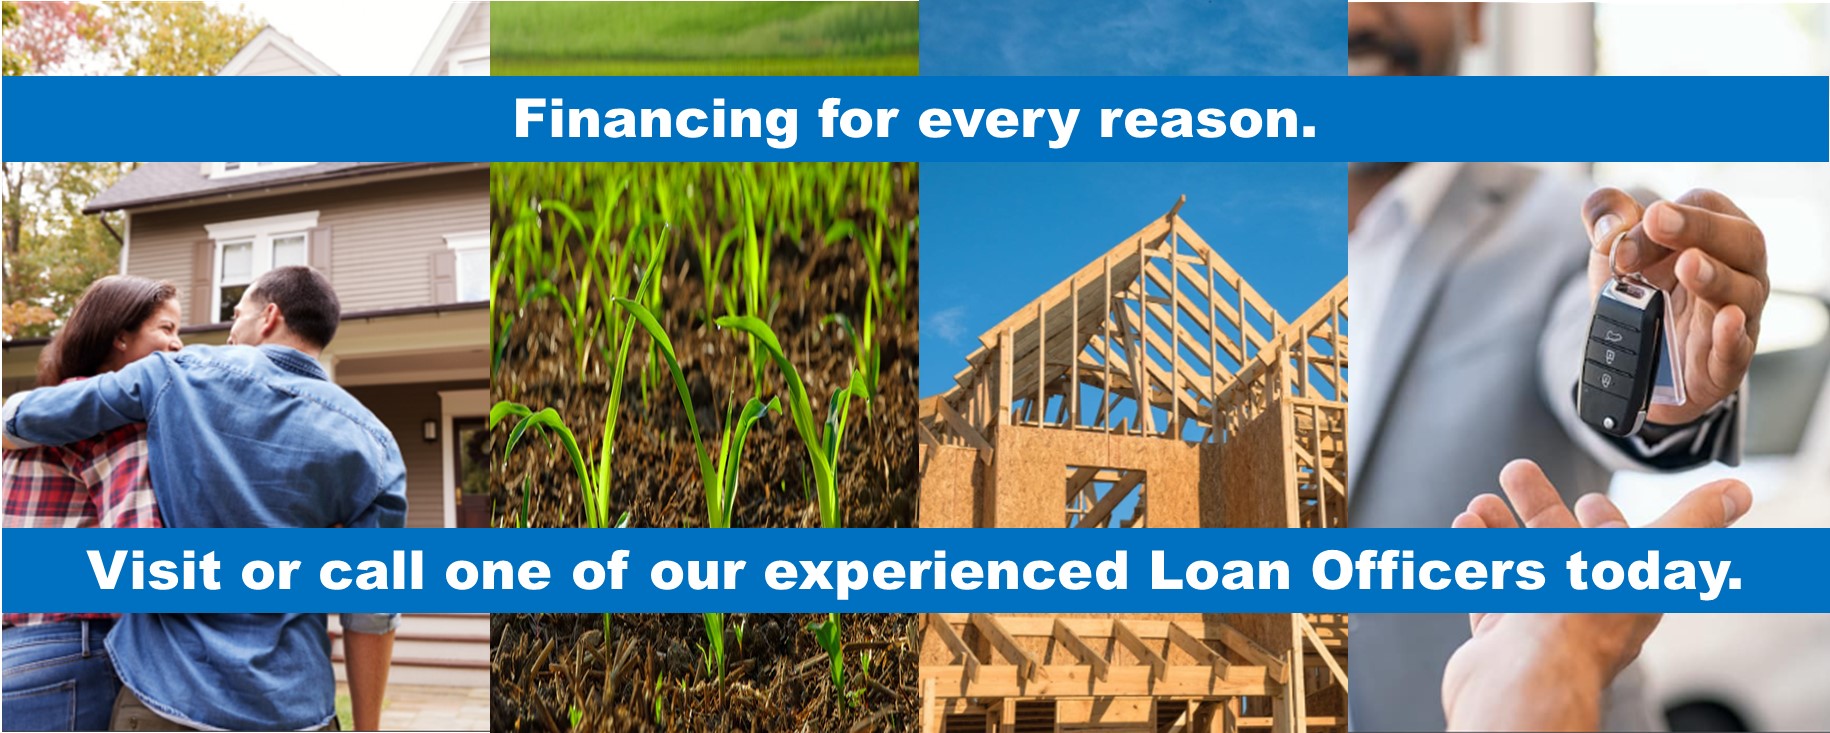 Financing for every reason